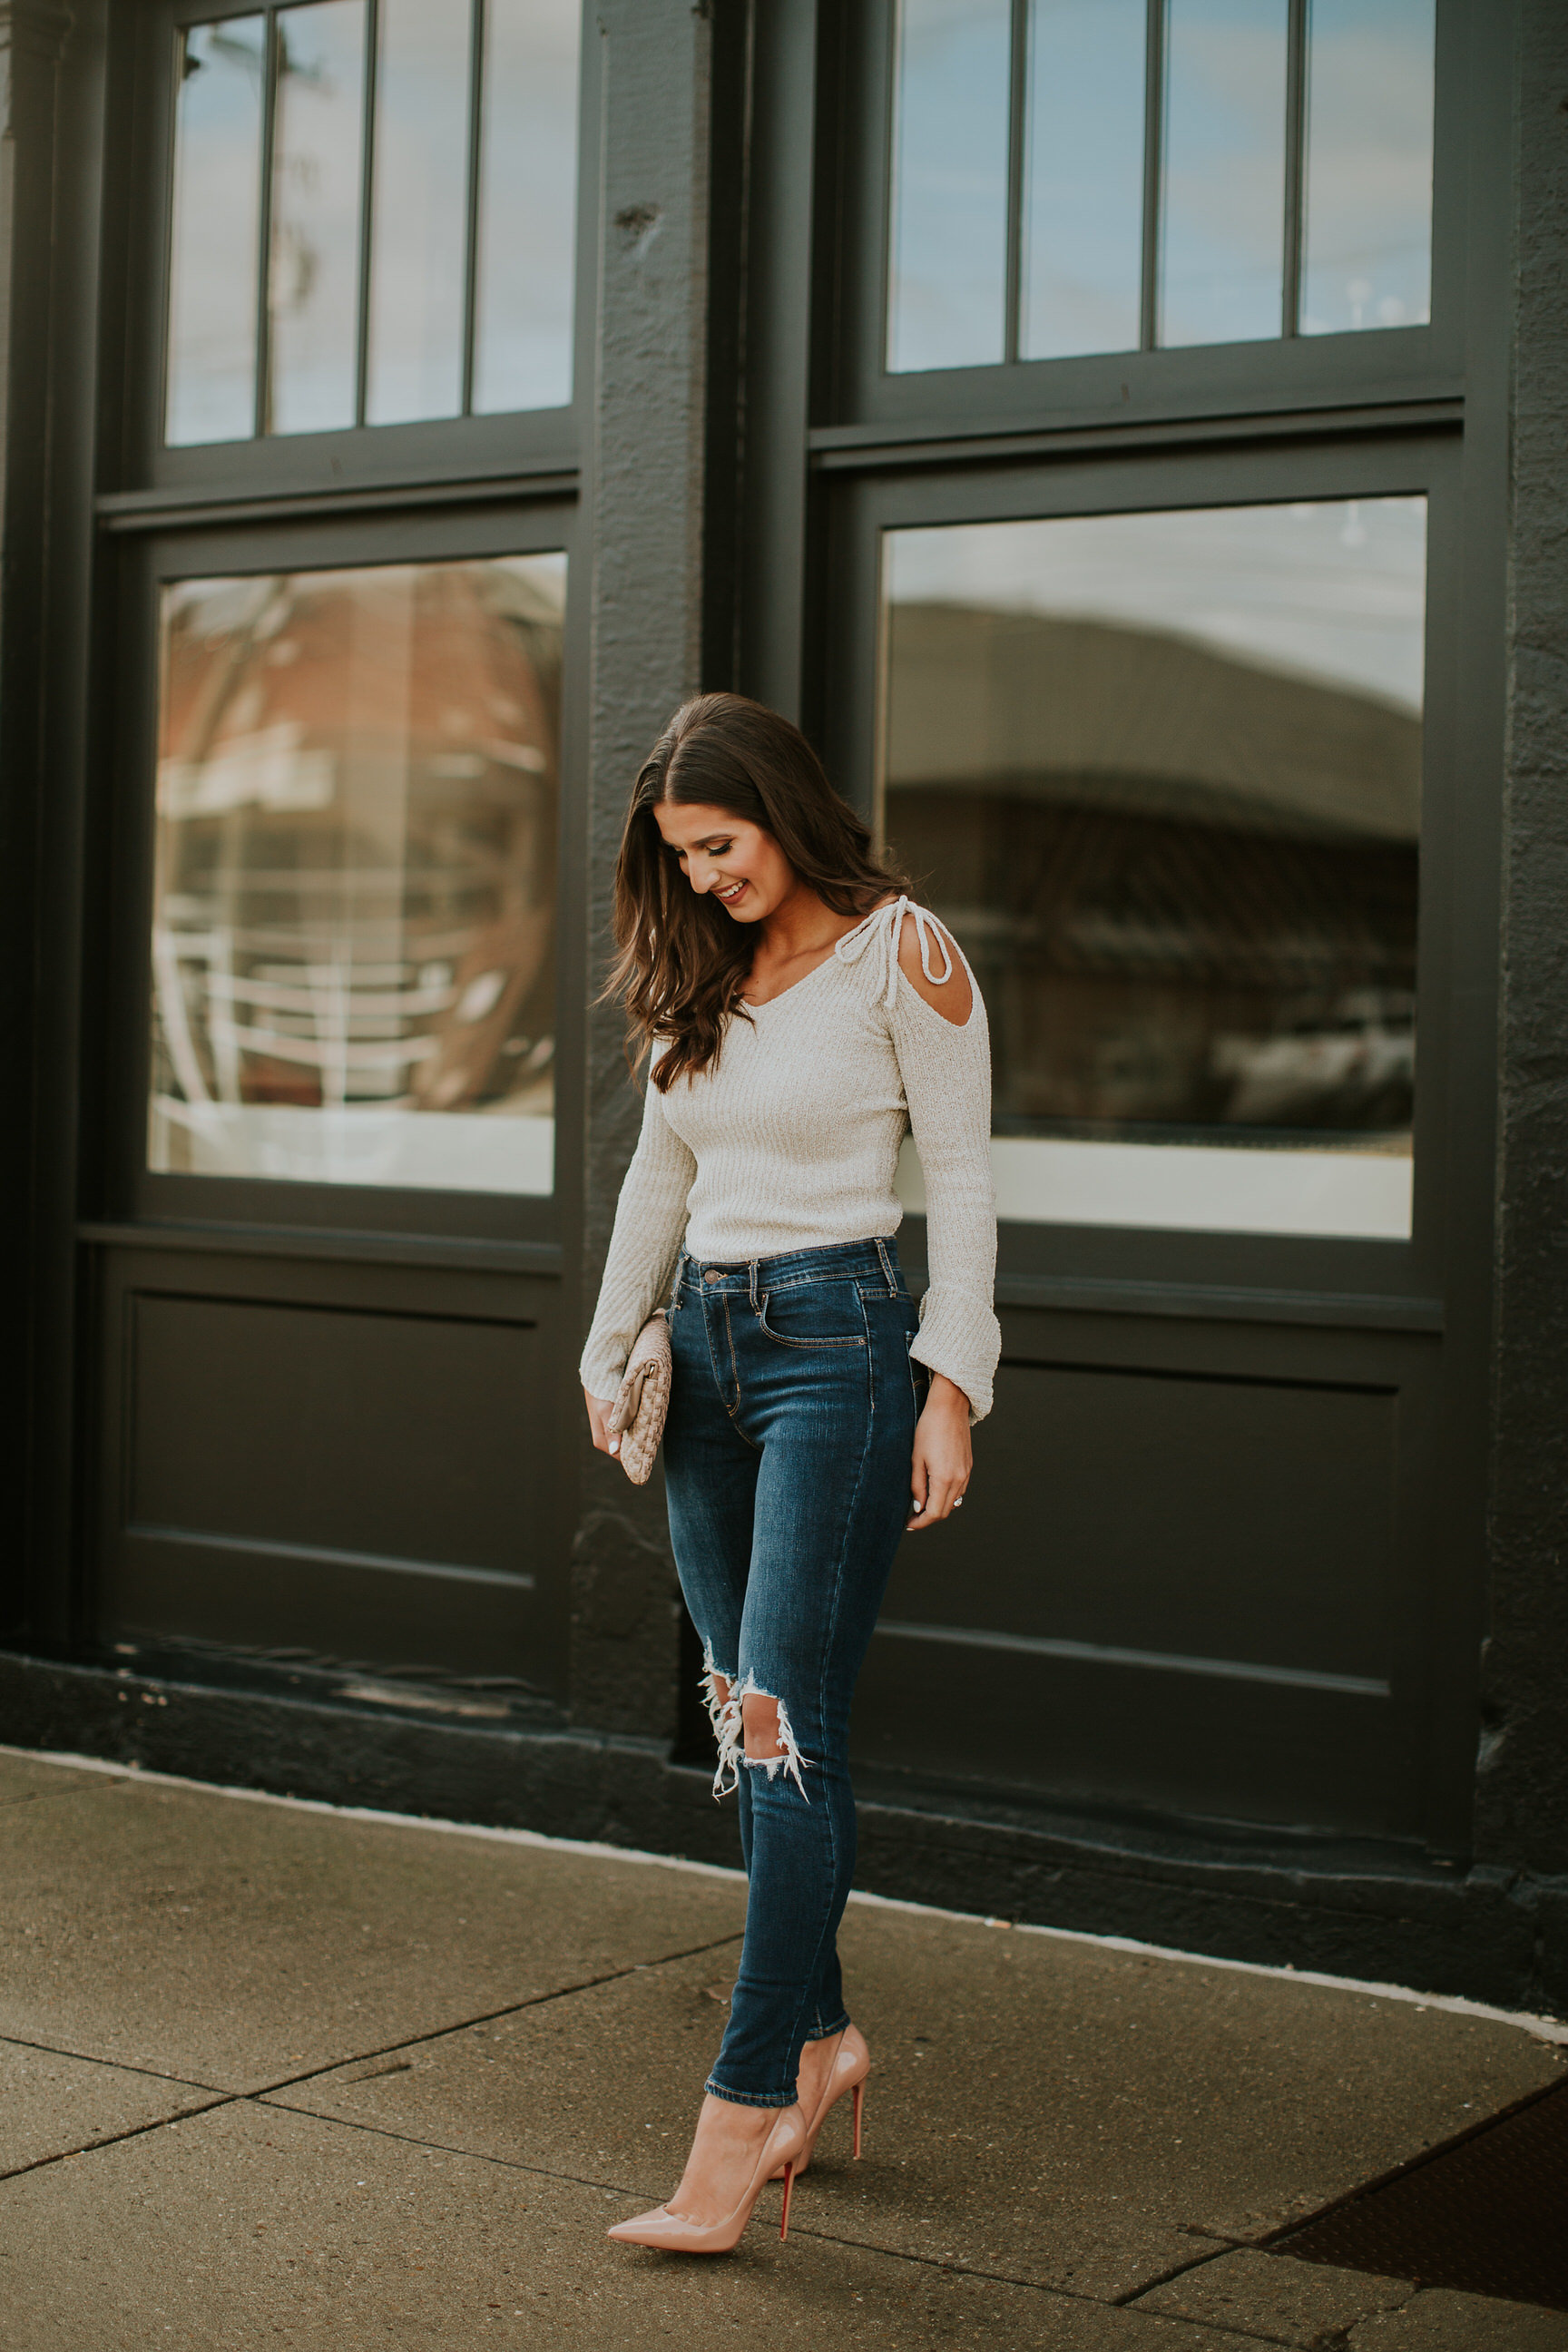 cold shoulder sweater, lilly pulitzer clutch, lilly pulitzer ibiza clutch, levis jeans, levis 721 high rise skinny jeans, cold shoulder top, cold shoulder sweaters, spring style, spring fashion, affordable outfit, affordable spring outfit // grace wainwright a southern drawl